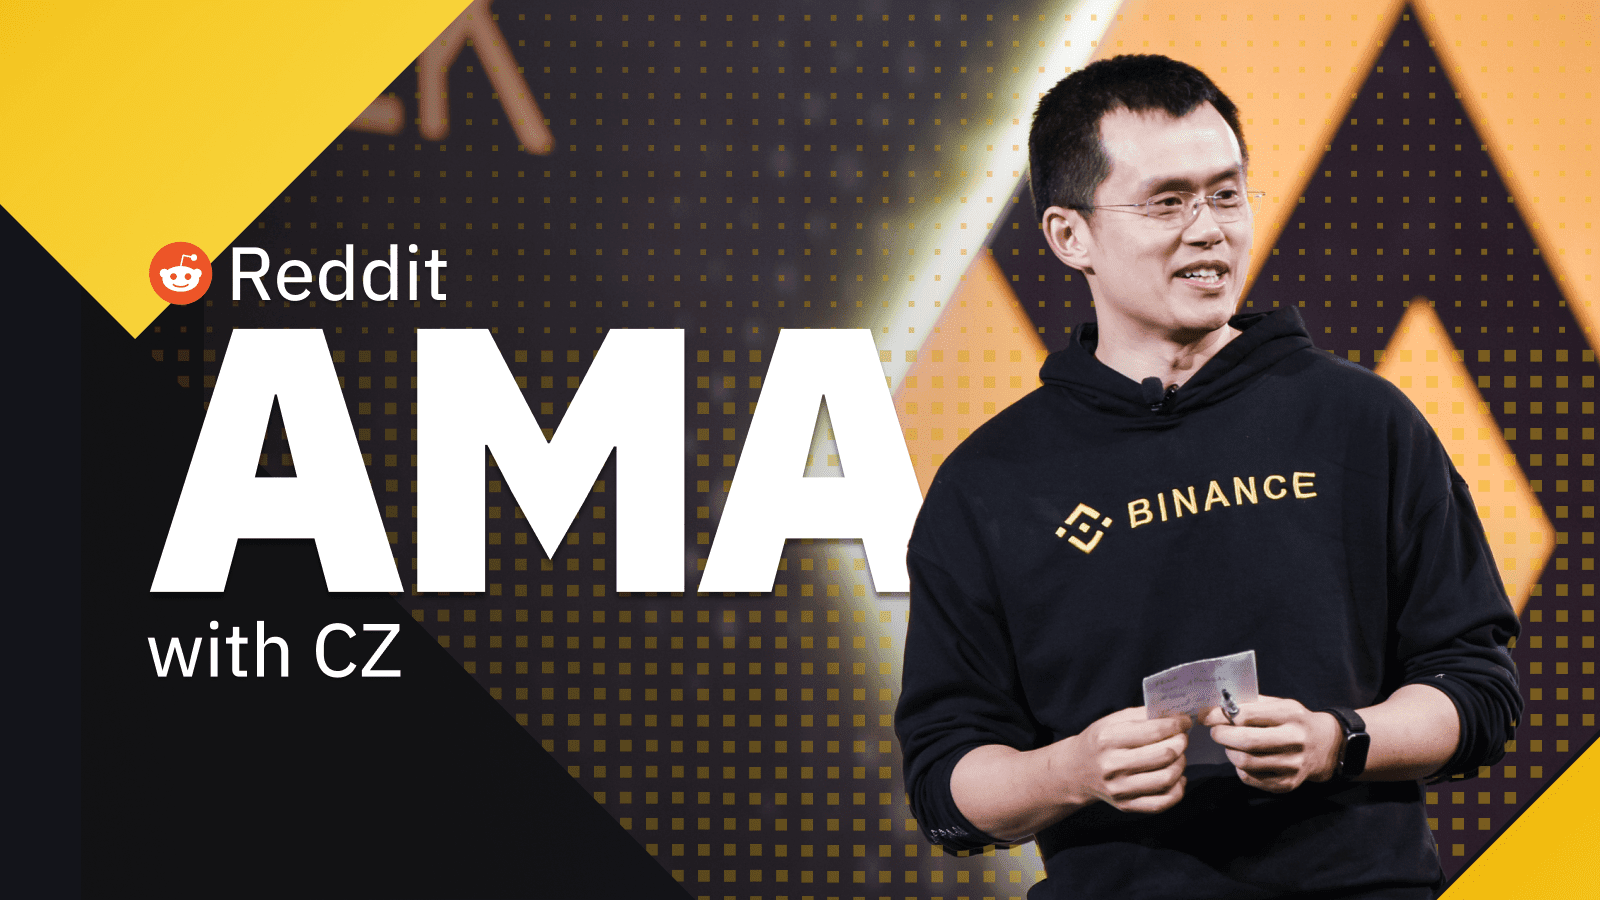 Binance Account Hacked - The Story & How To Secure Binance Account